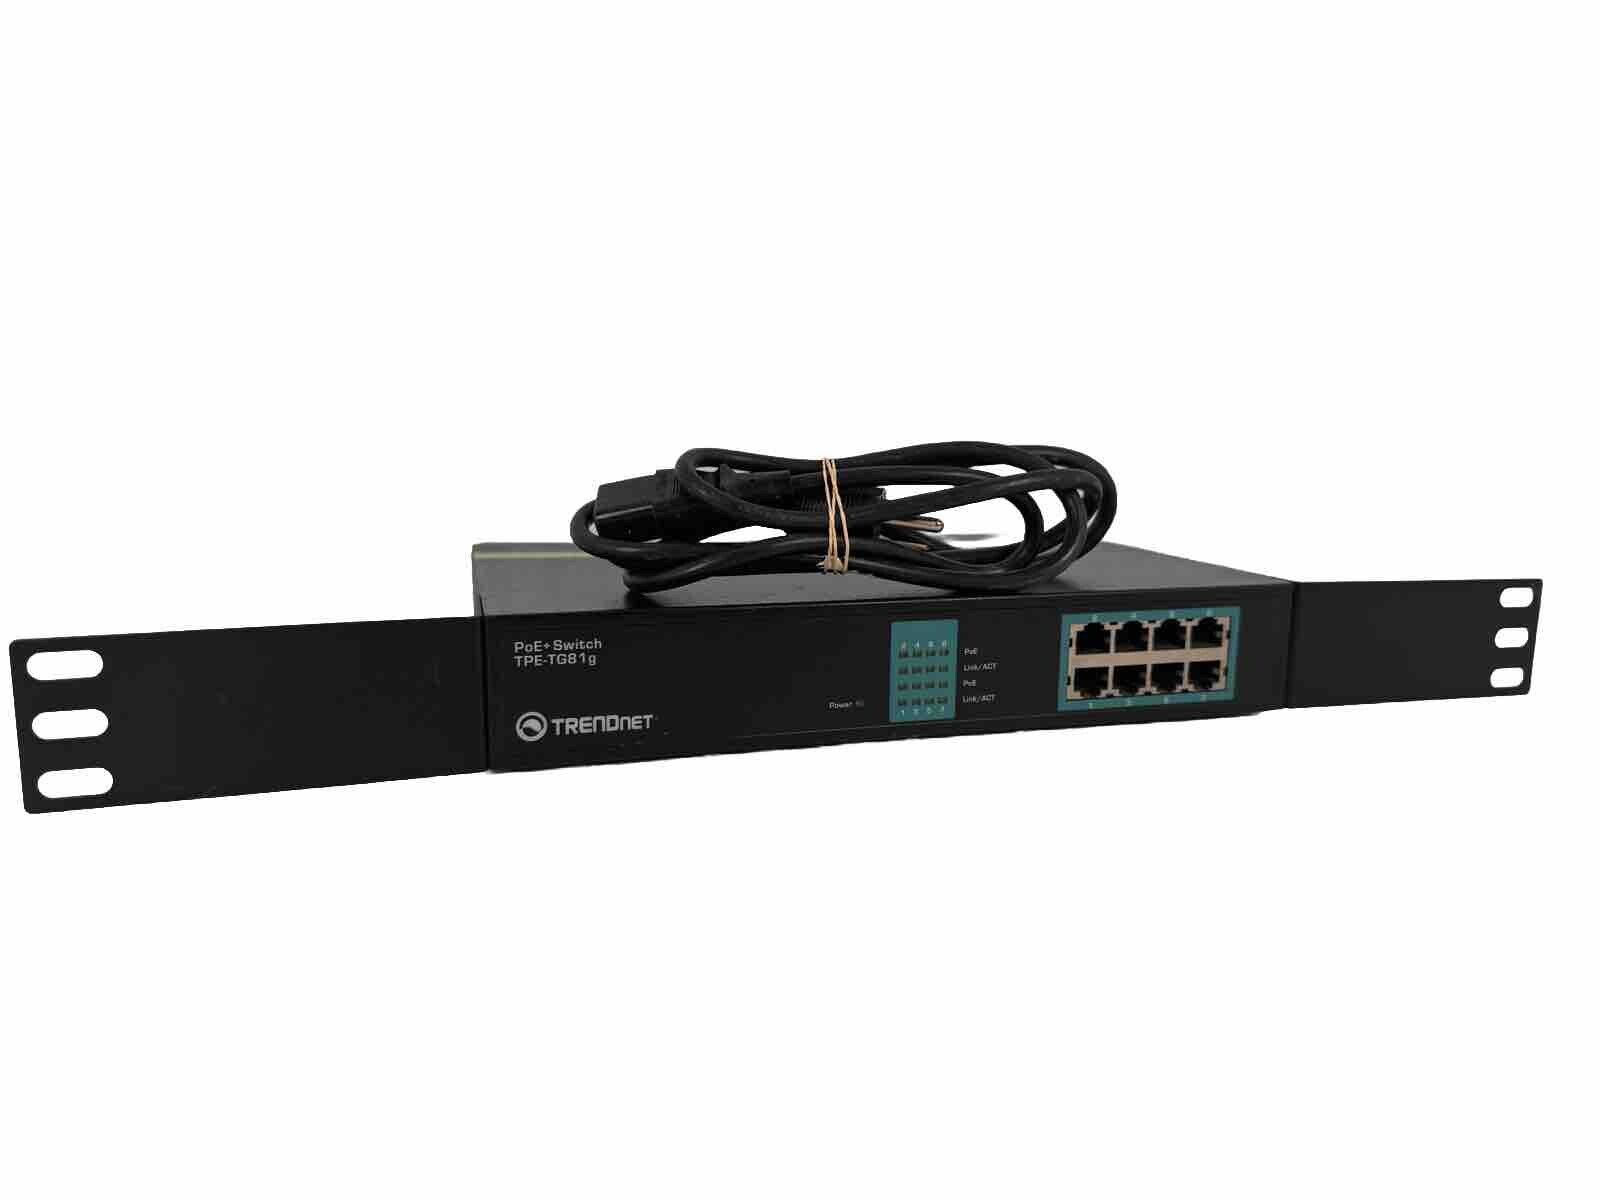 TrendNet TPE-TG81g/A POE+ Gigabit Ethernet Switch 100W With Power Cable